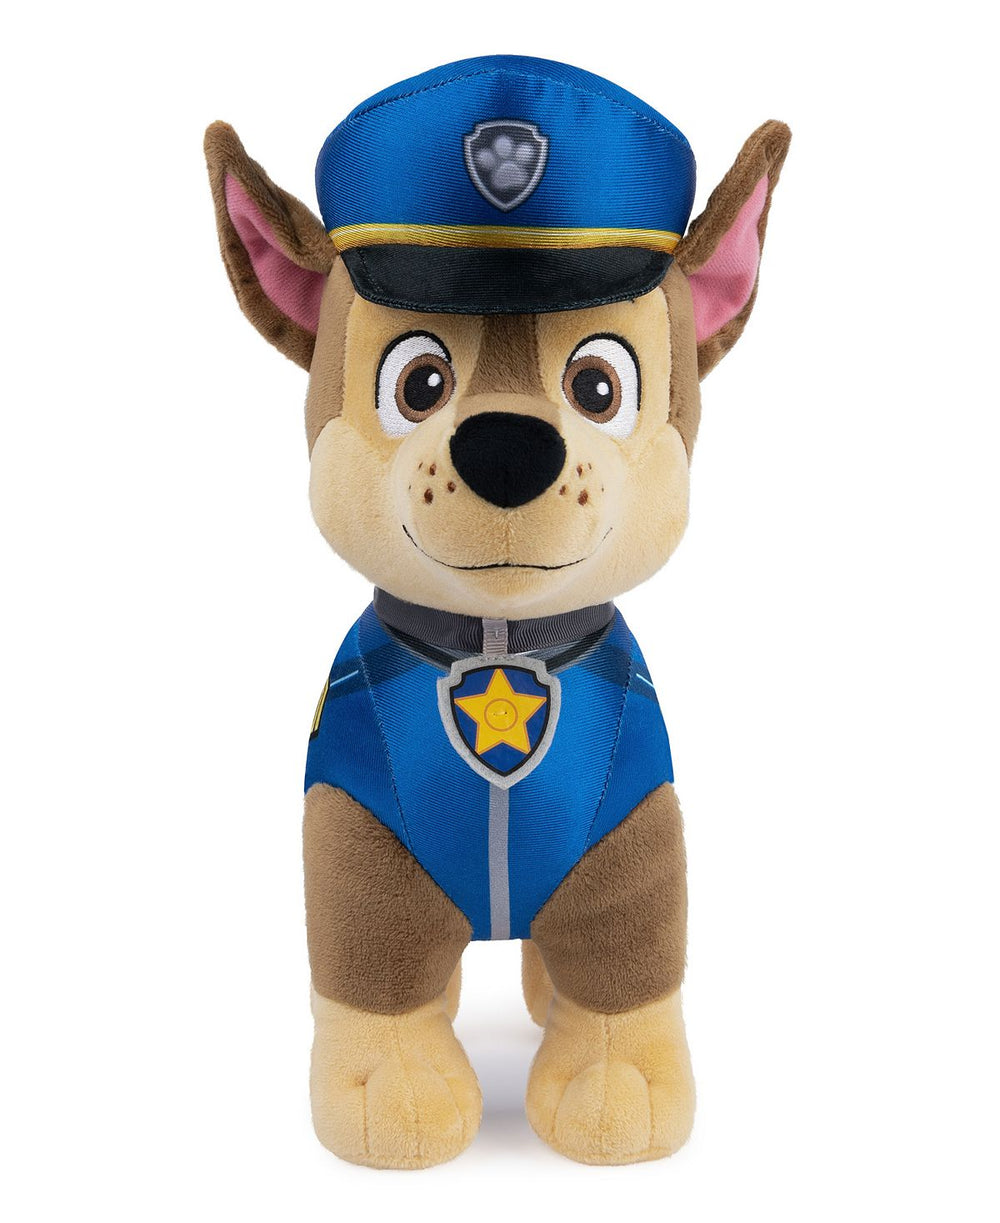 PAW Patrol 12 inch Heroic Chase Plush Toy in Police Uniform